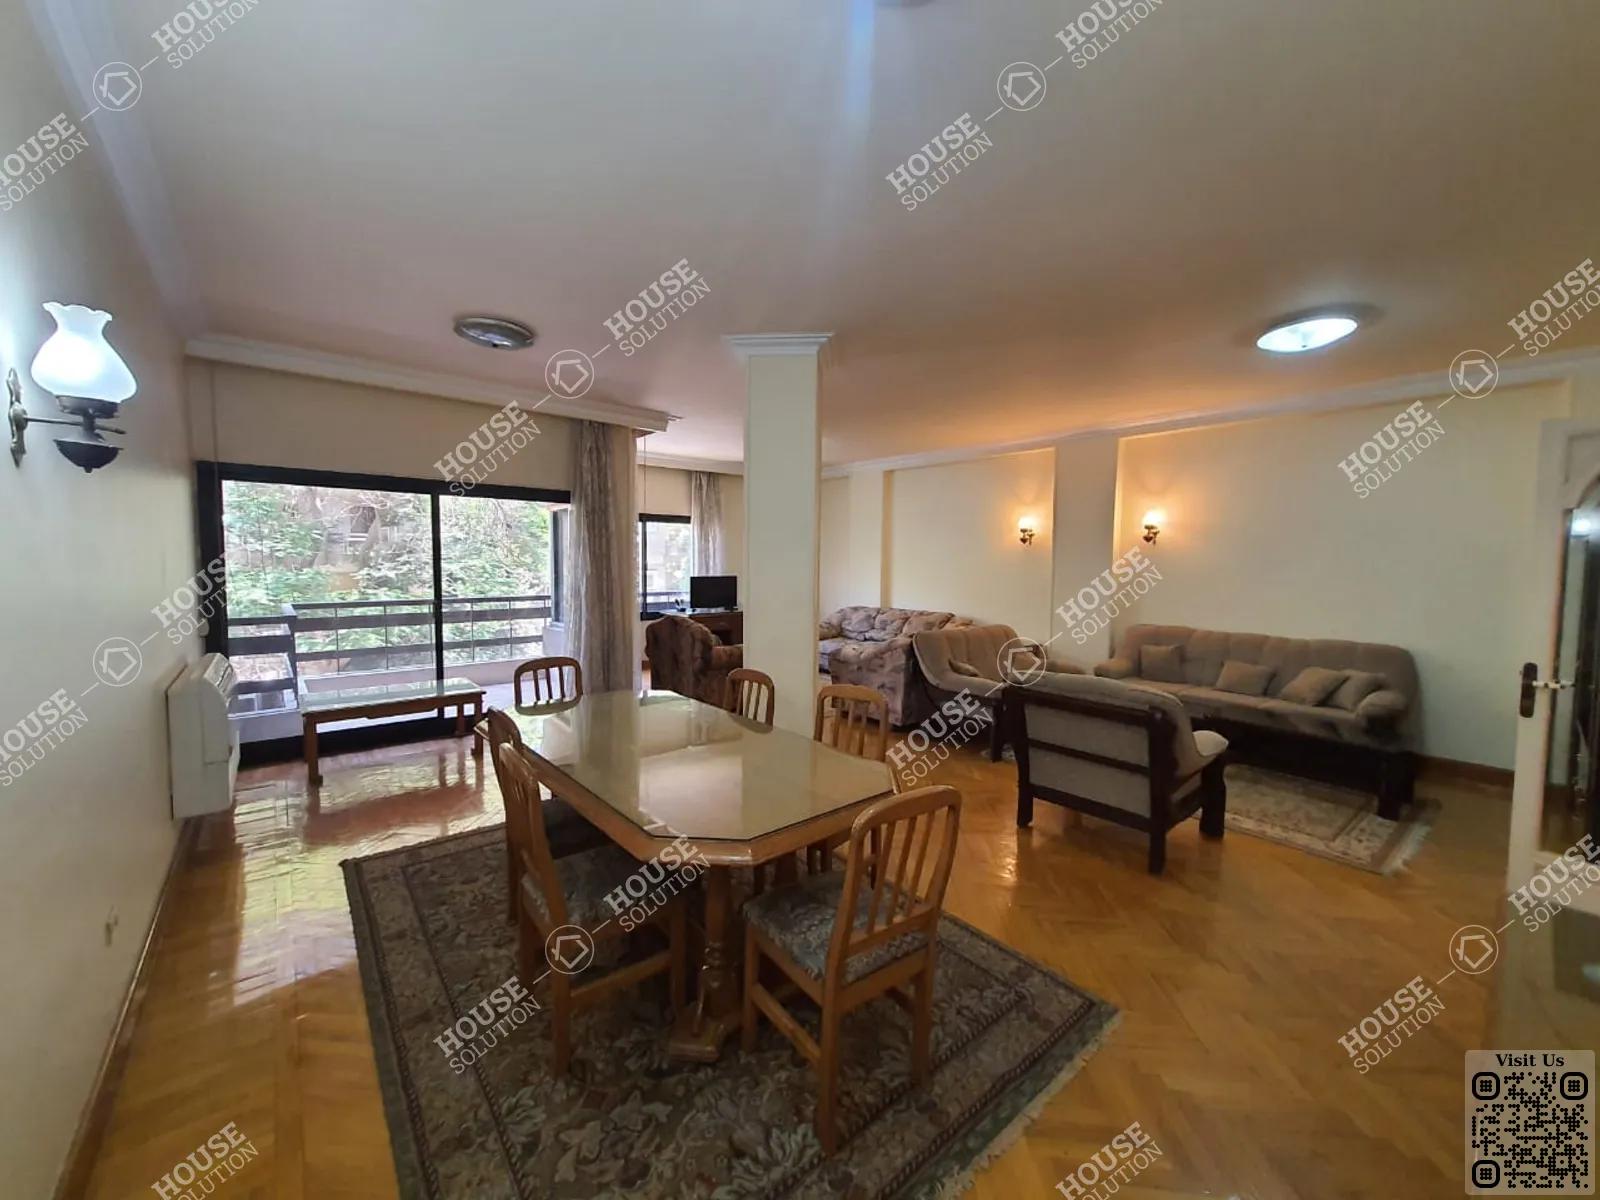 RECEPTION  @ Apartments For Rent In Maadi Maadi Degla Area: 200 m² consists of 3 Bedrooms 3 Bathrooms Furnished 5 stars #5521-0